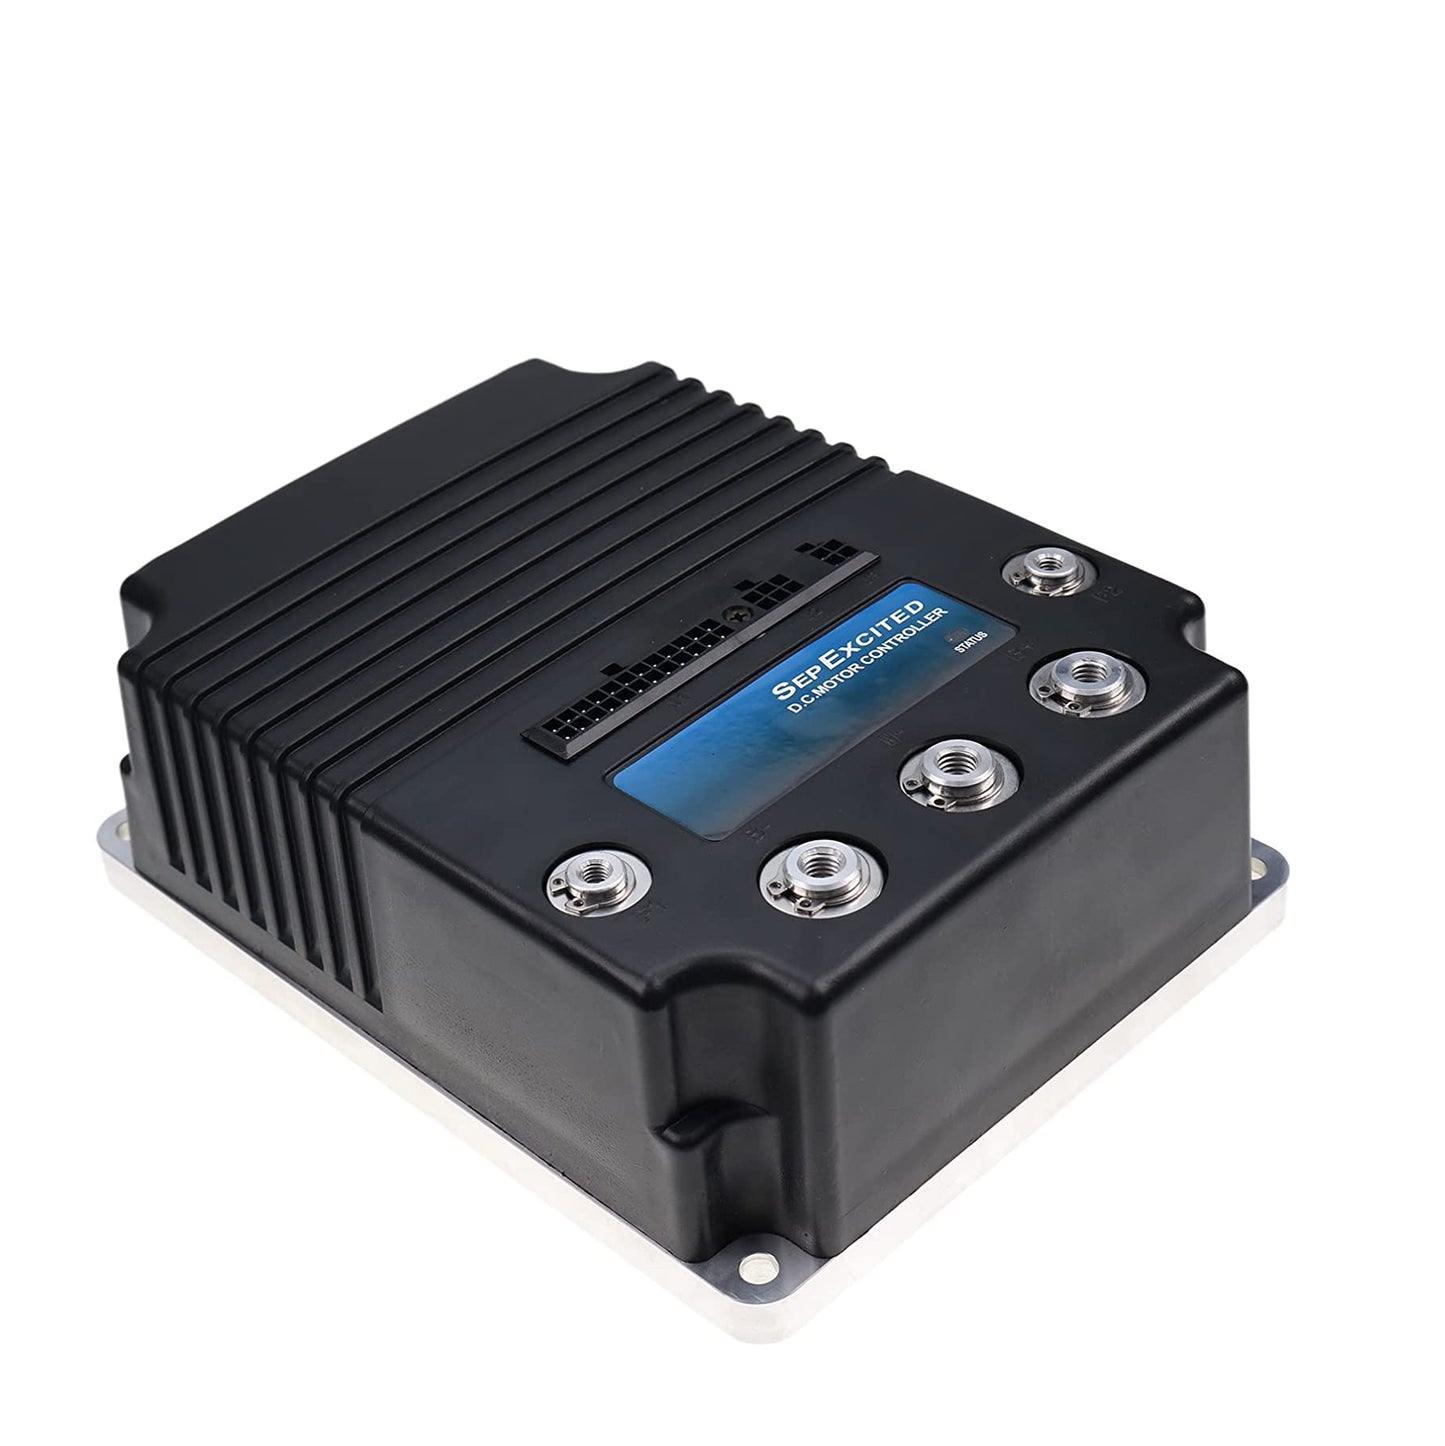 New Programmable DC SepEx Motor Controller 1244-5461 36V-48V 400A 0-5k Compatible with Curtis Electric Forklift Melex 252 Golf Cart